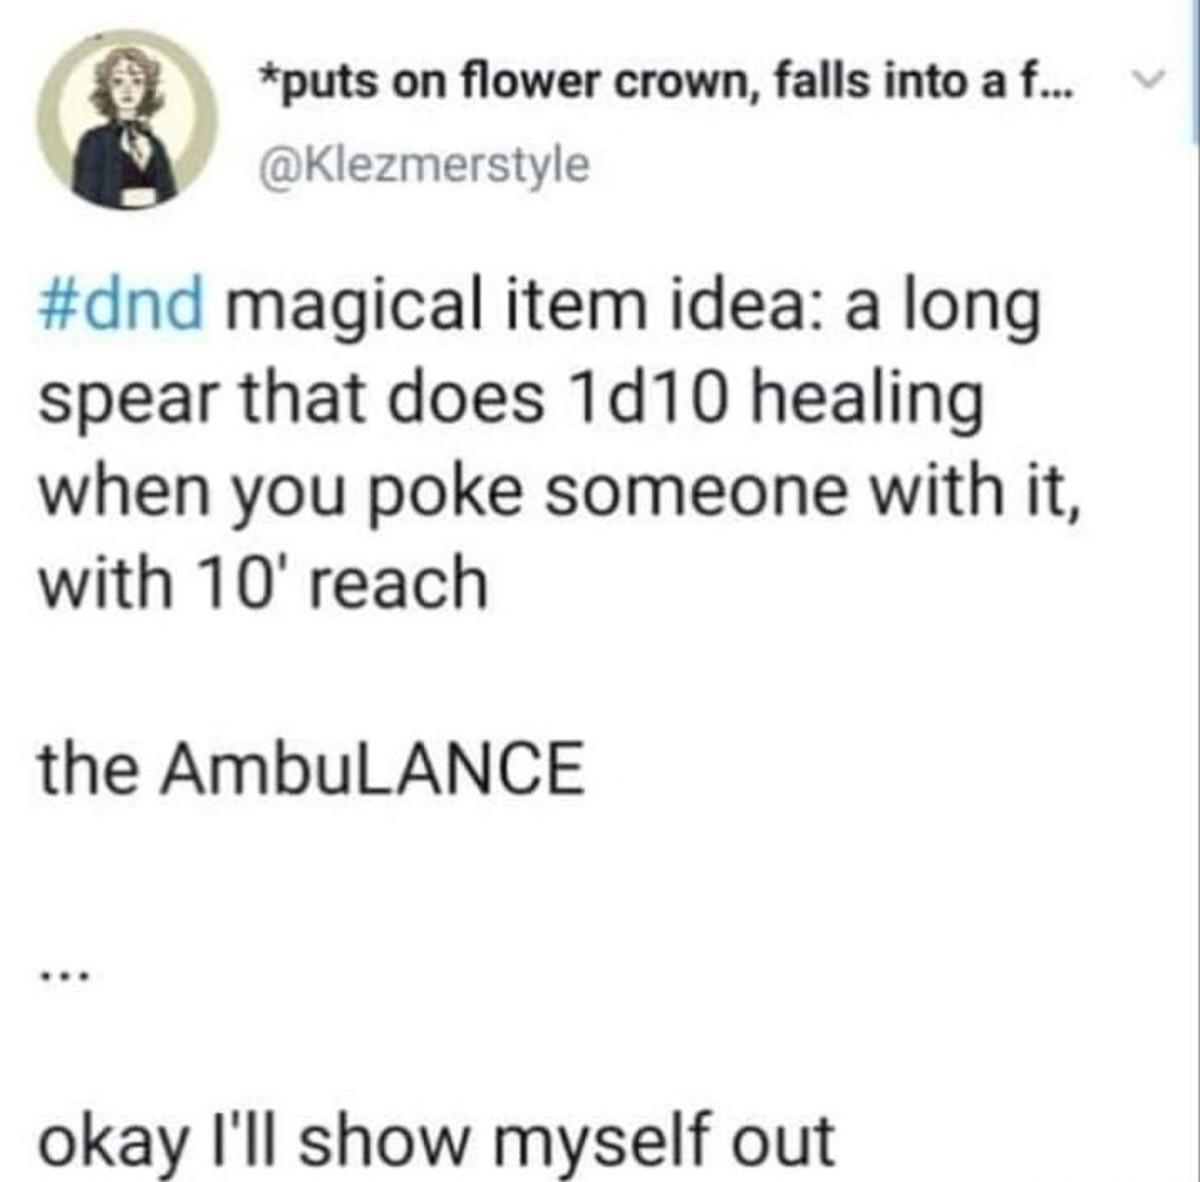 dank memes - funny memes - paper - puts on flower crown, falls into a f... magical item idea a long spear that does 1010 healing when you poke someone with it, with 10' reach the AmbuLANCE okay I'll show myself out